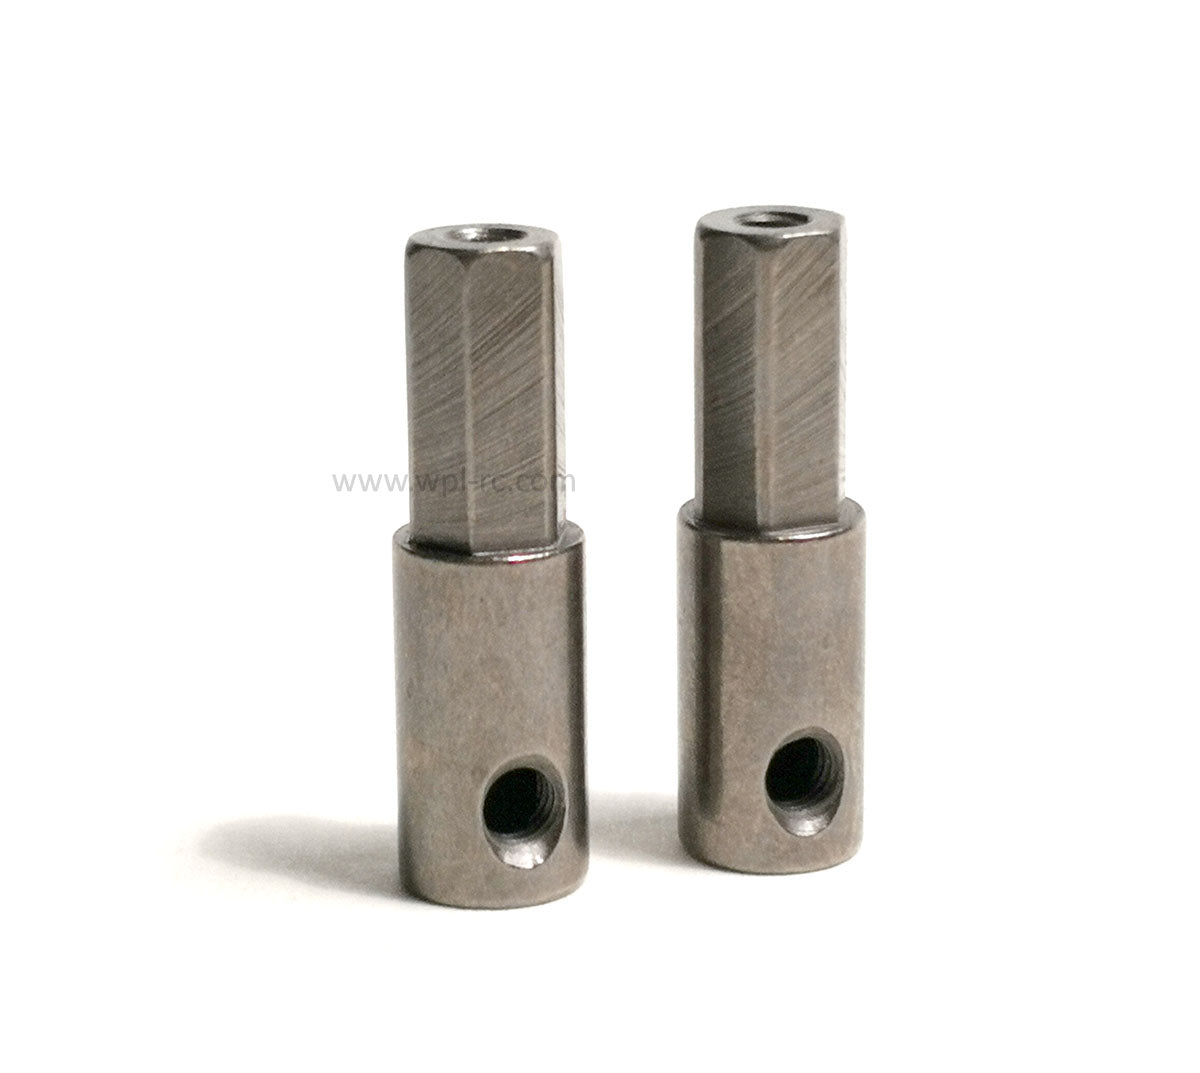 Metal Hex Wheel Adapters - 2 pcs - WPL RC Official Store